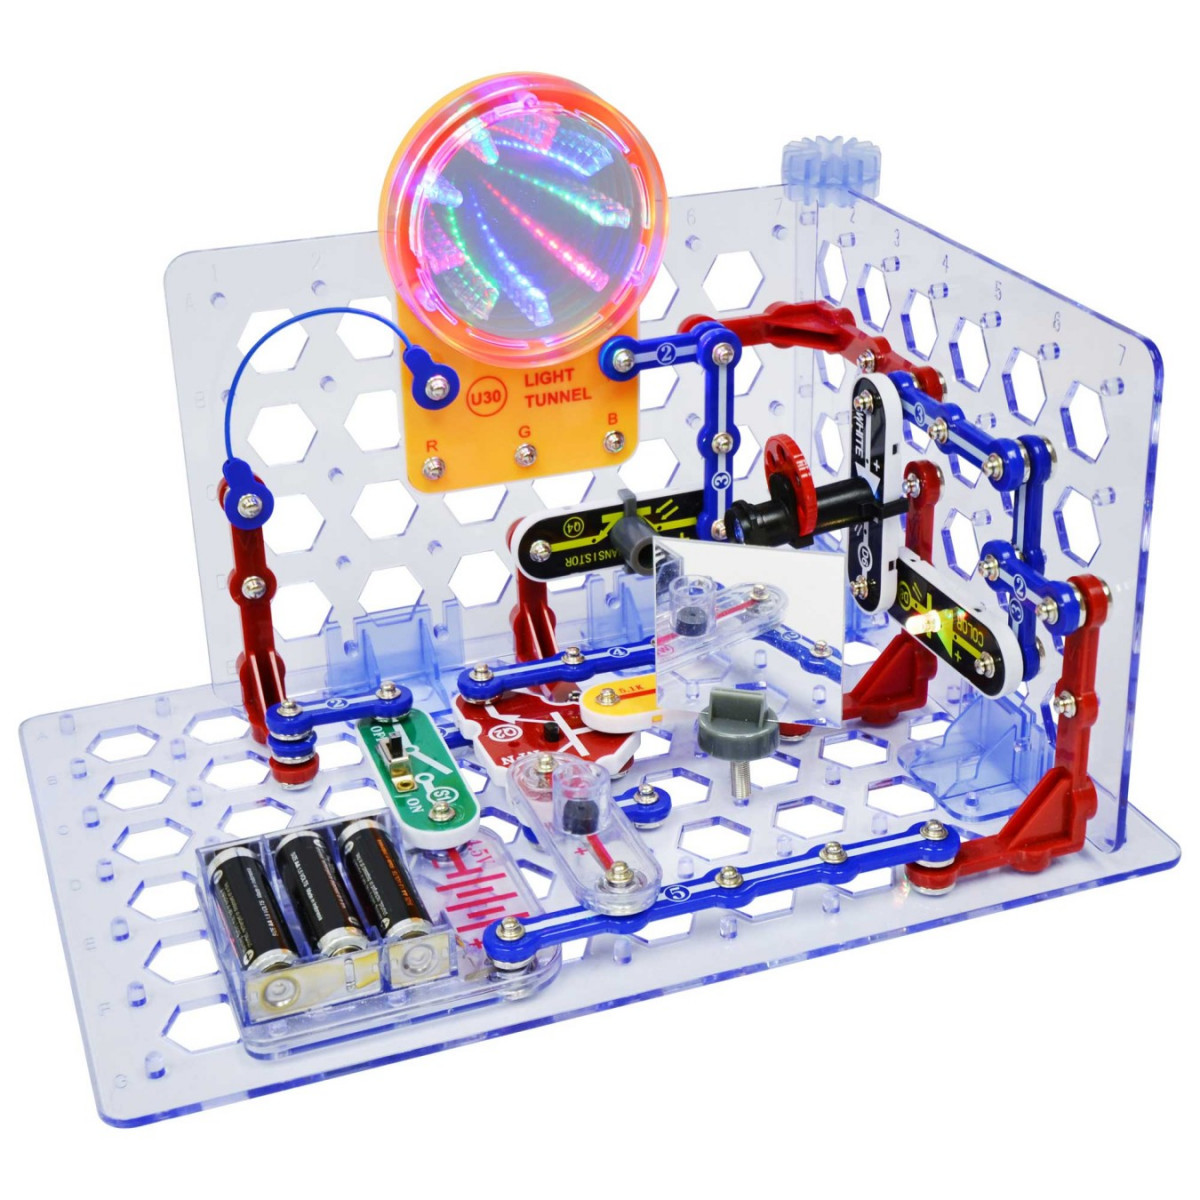 Gift for Hands-On Electronics Experiments: Snap Circuits - Age: 8+